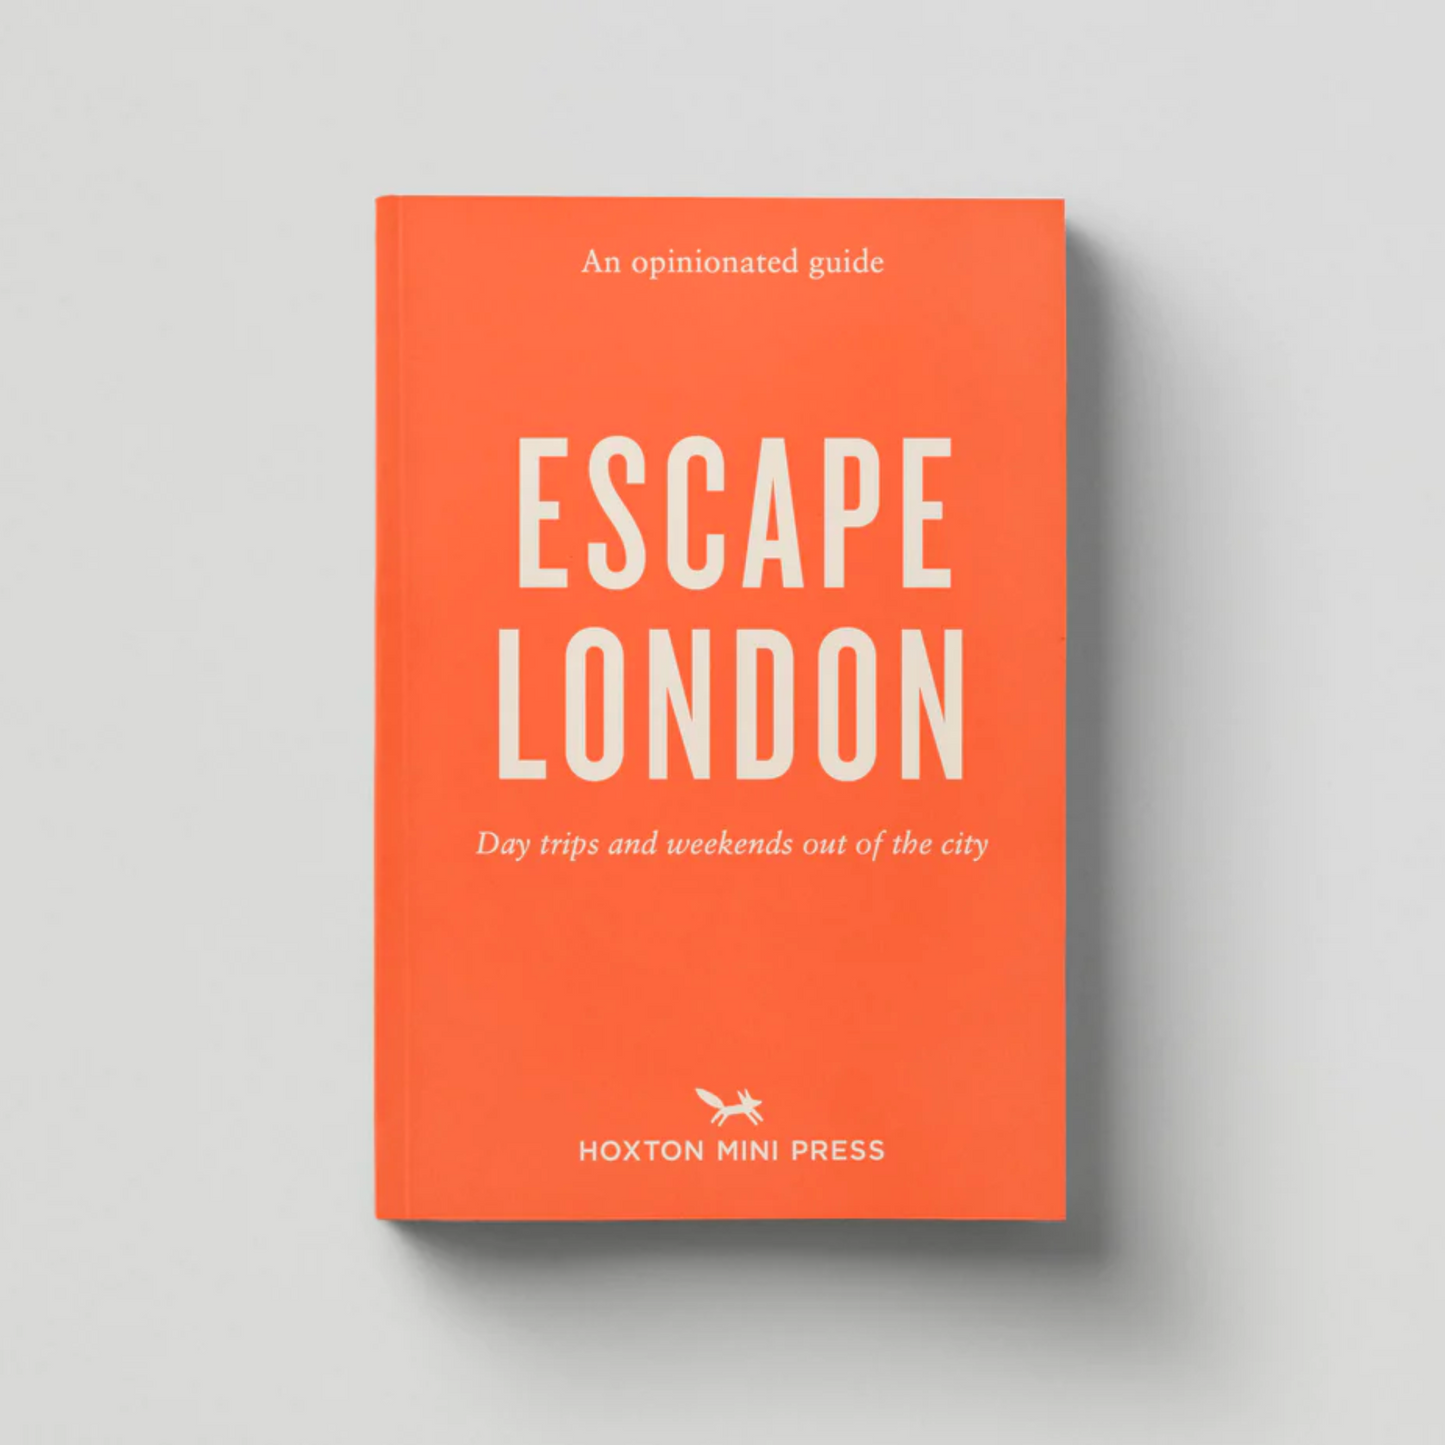 An Opinionated Guide: Escape London